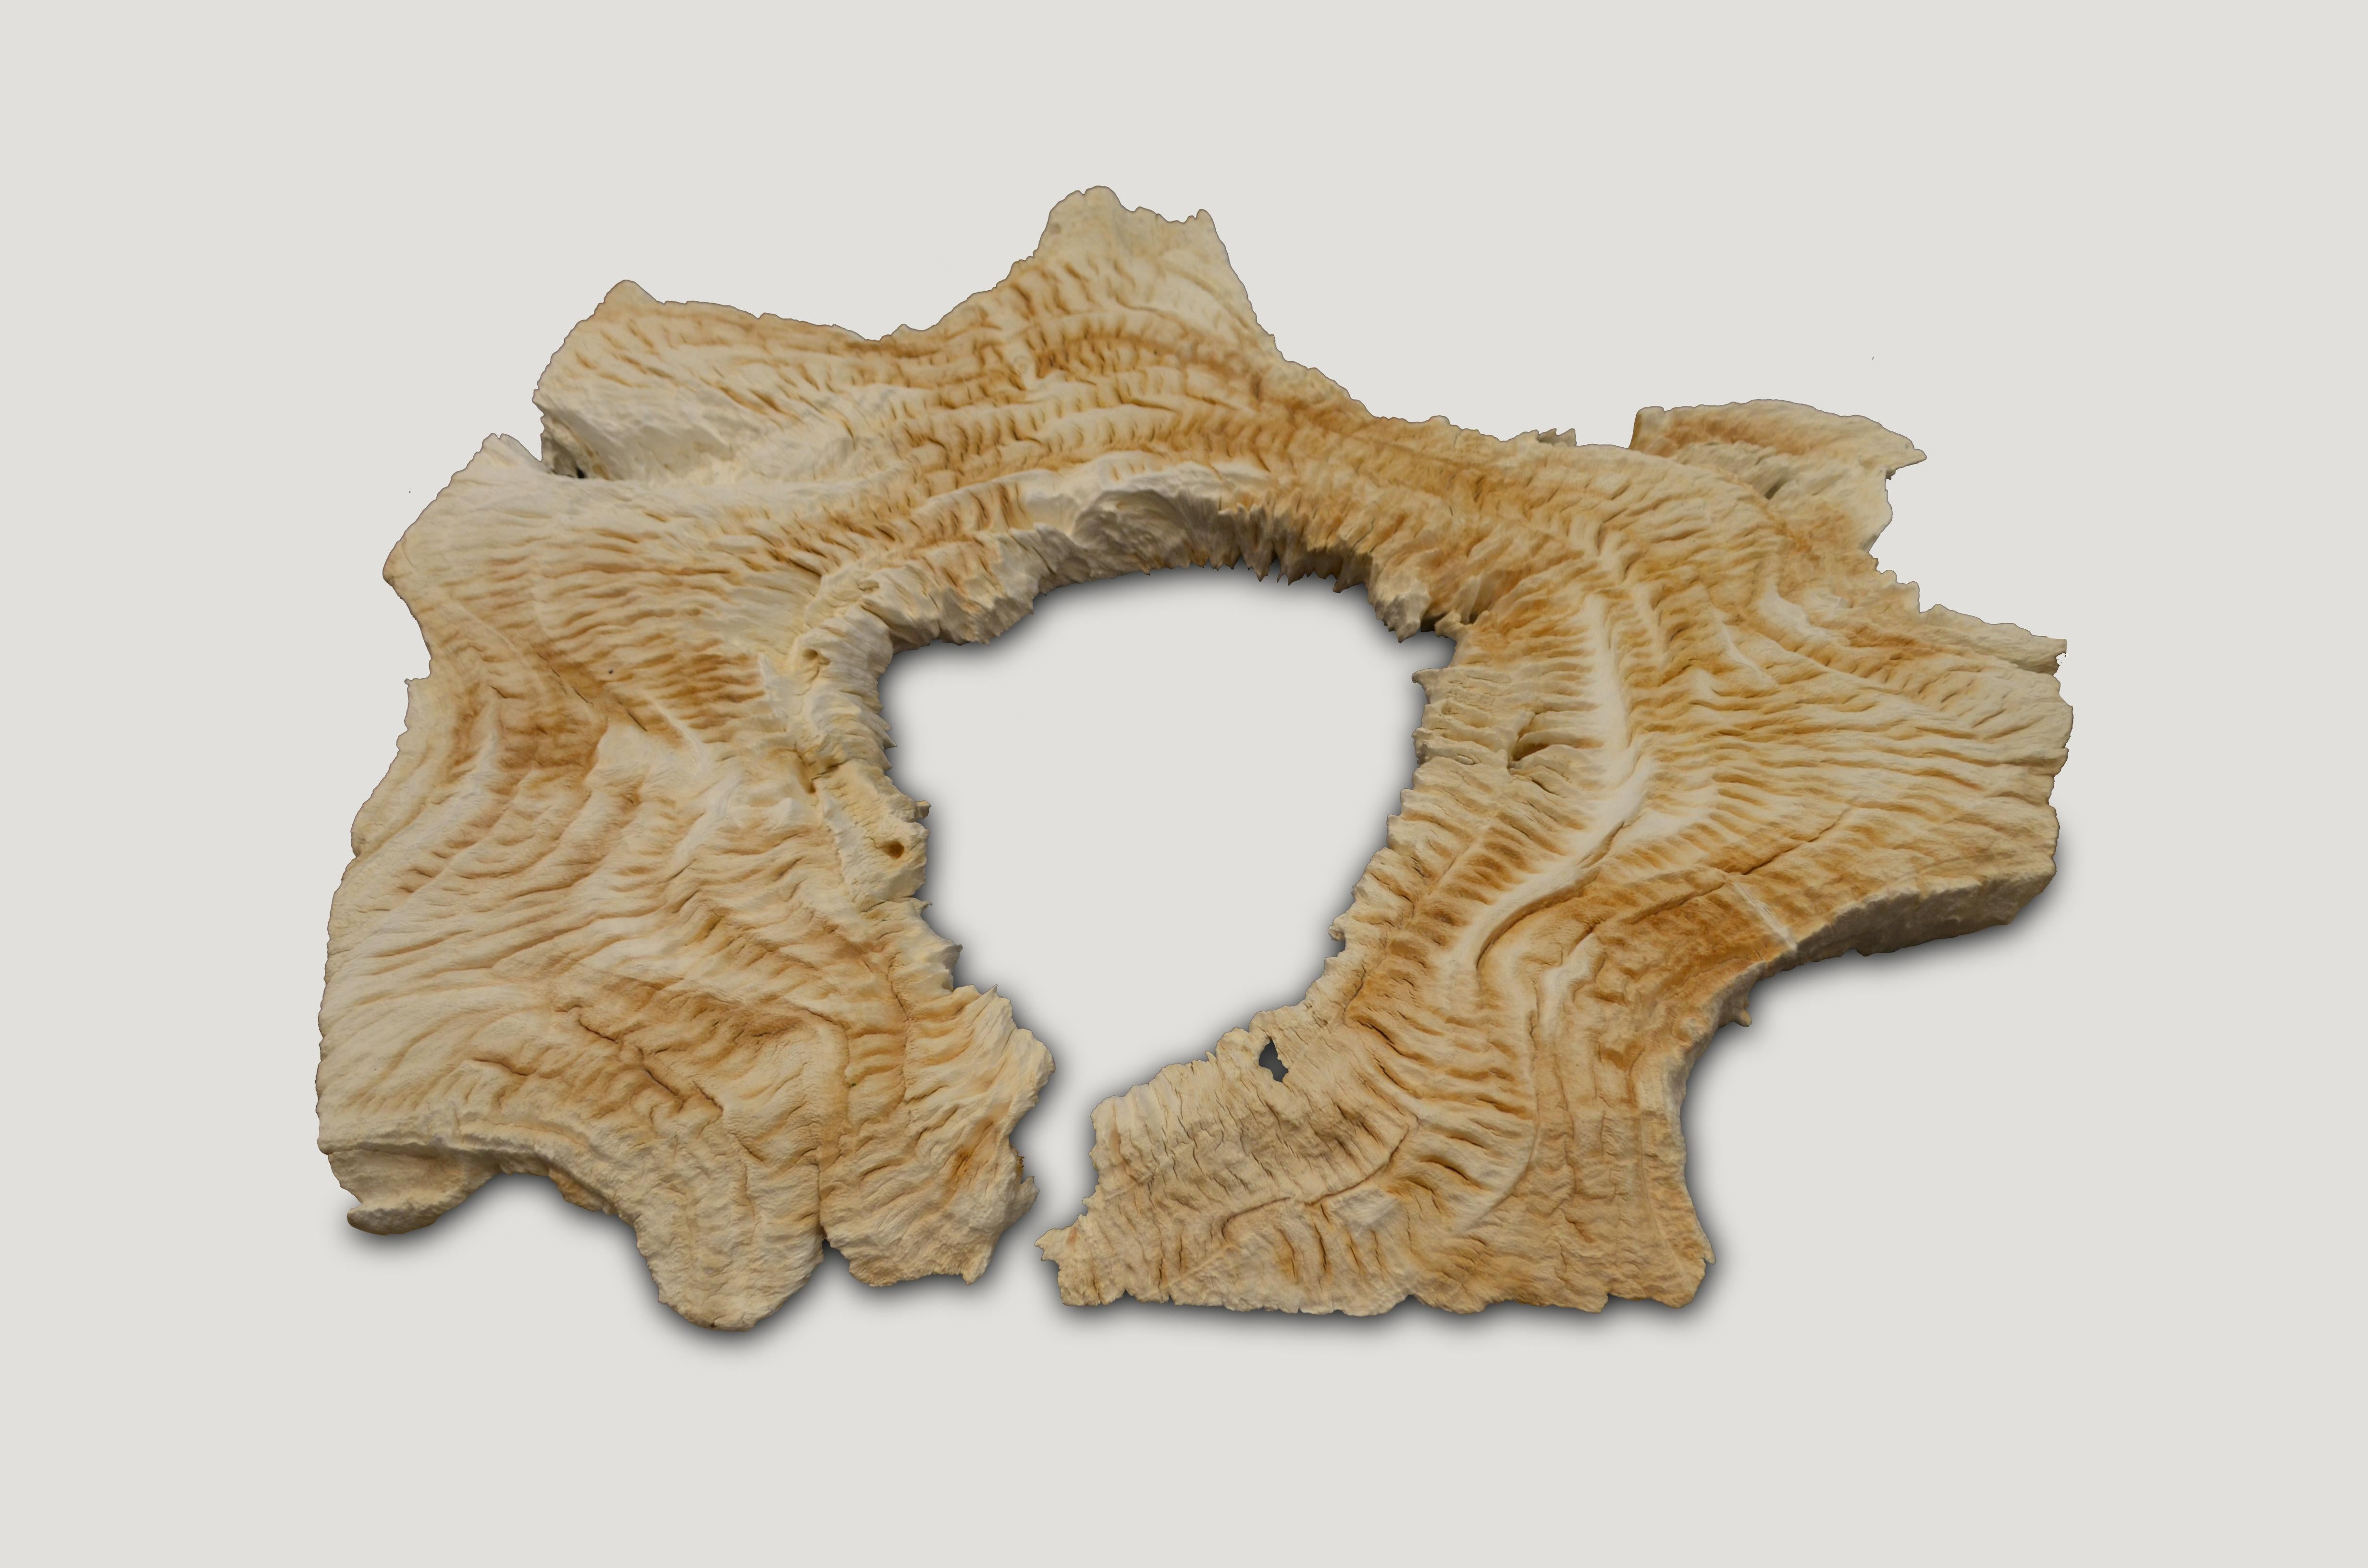 Stunningly beautiful, naturally formed single teak root sculpture. We found this deep in the jungle in Sumatra, nursed it back from the burning volcanoes, added bleach and left it to bake in the sun and sea salt air for over a year. Fabulous as an